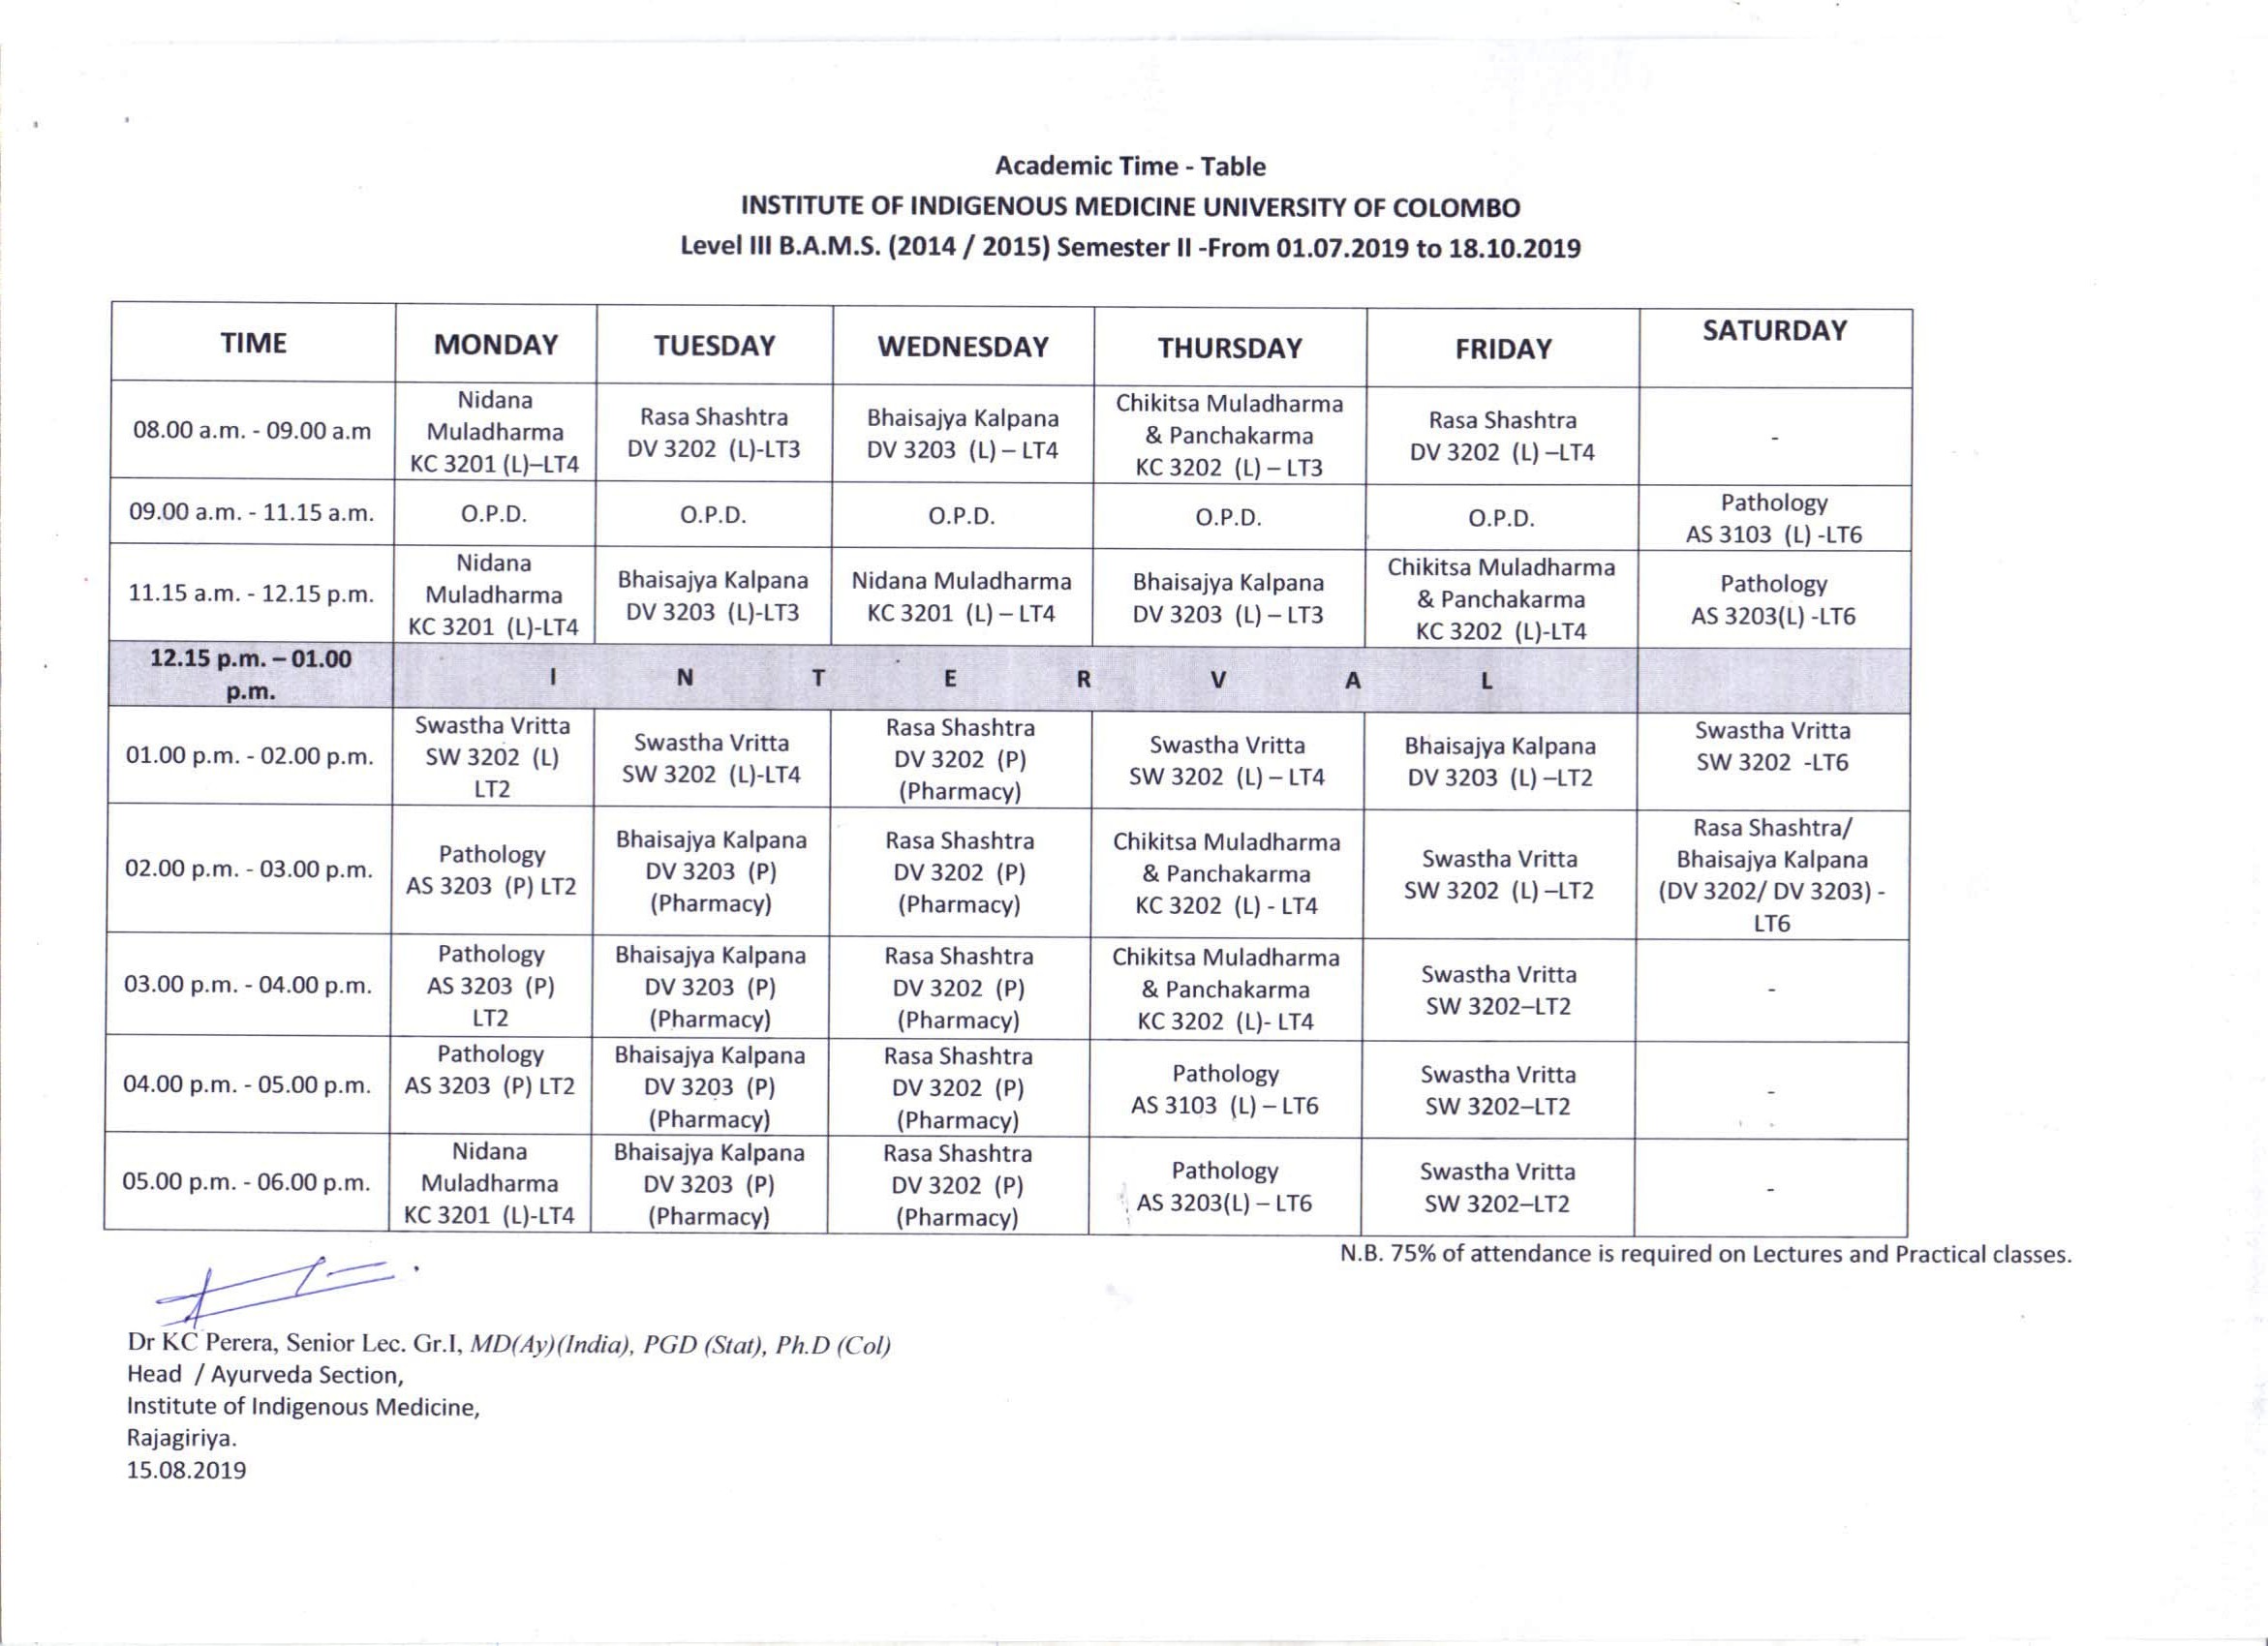 level-iii-b-a-m-s-2014-2015-second-semester-revised-academic-time-table-faculty-of